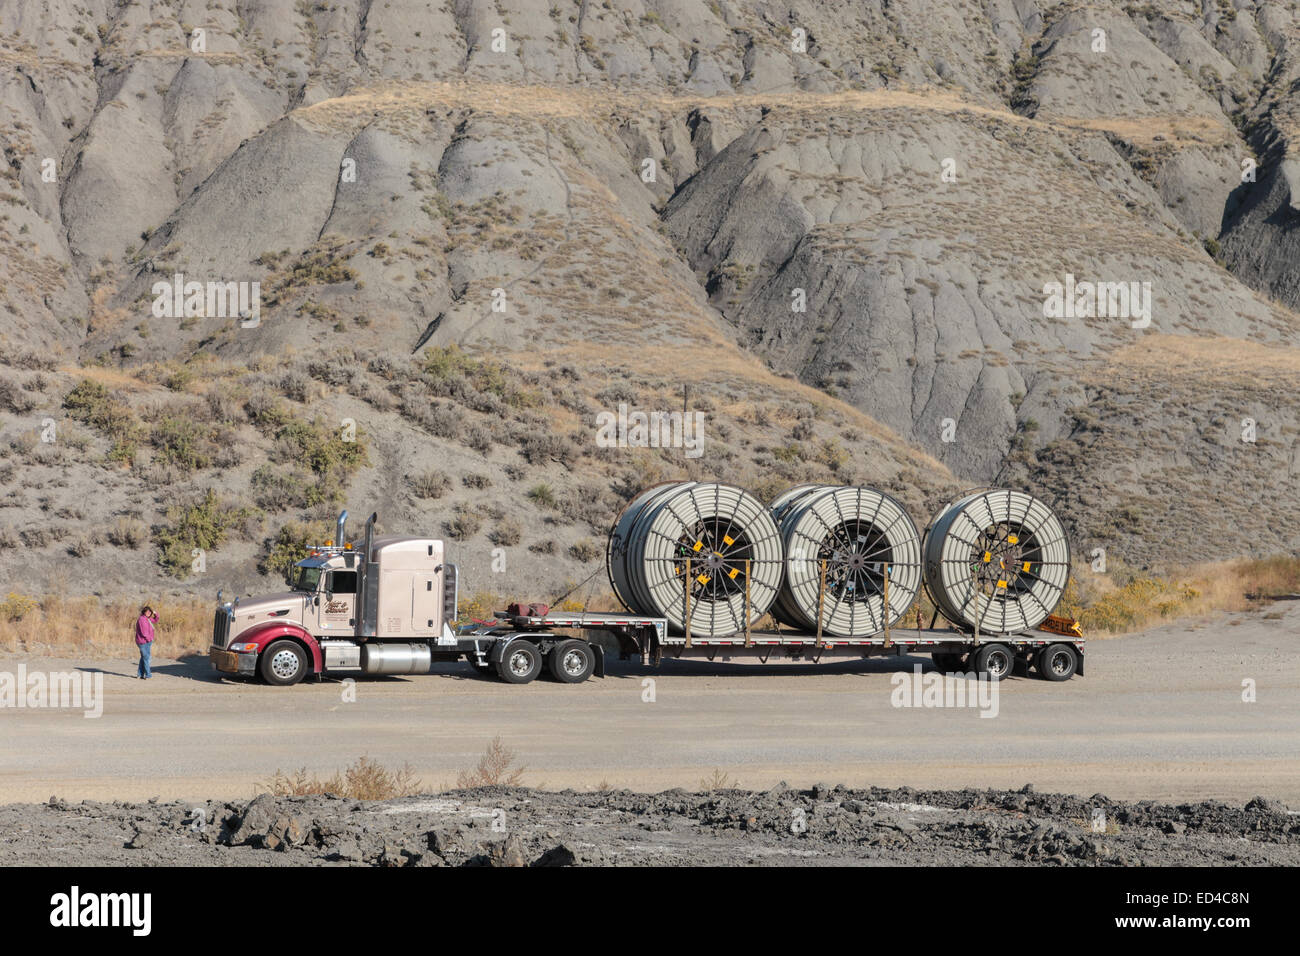 An American Peterbilt 379 semi truck hauling reels of HDPE plastic pipe on a flatbed trailer for the oil industry and fracking sites in the USA Stock Photo